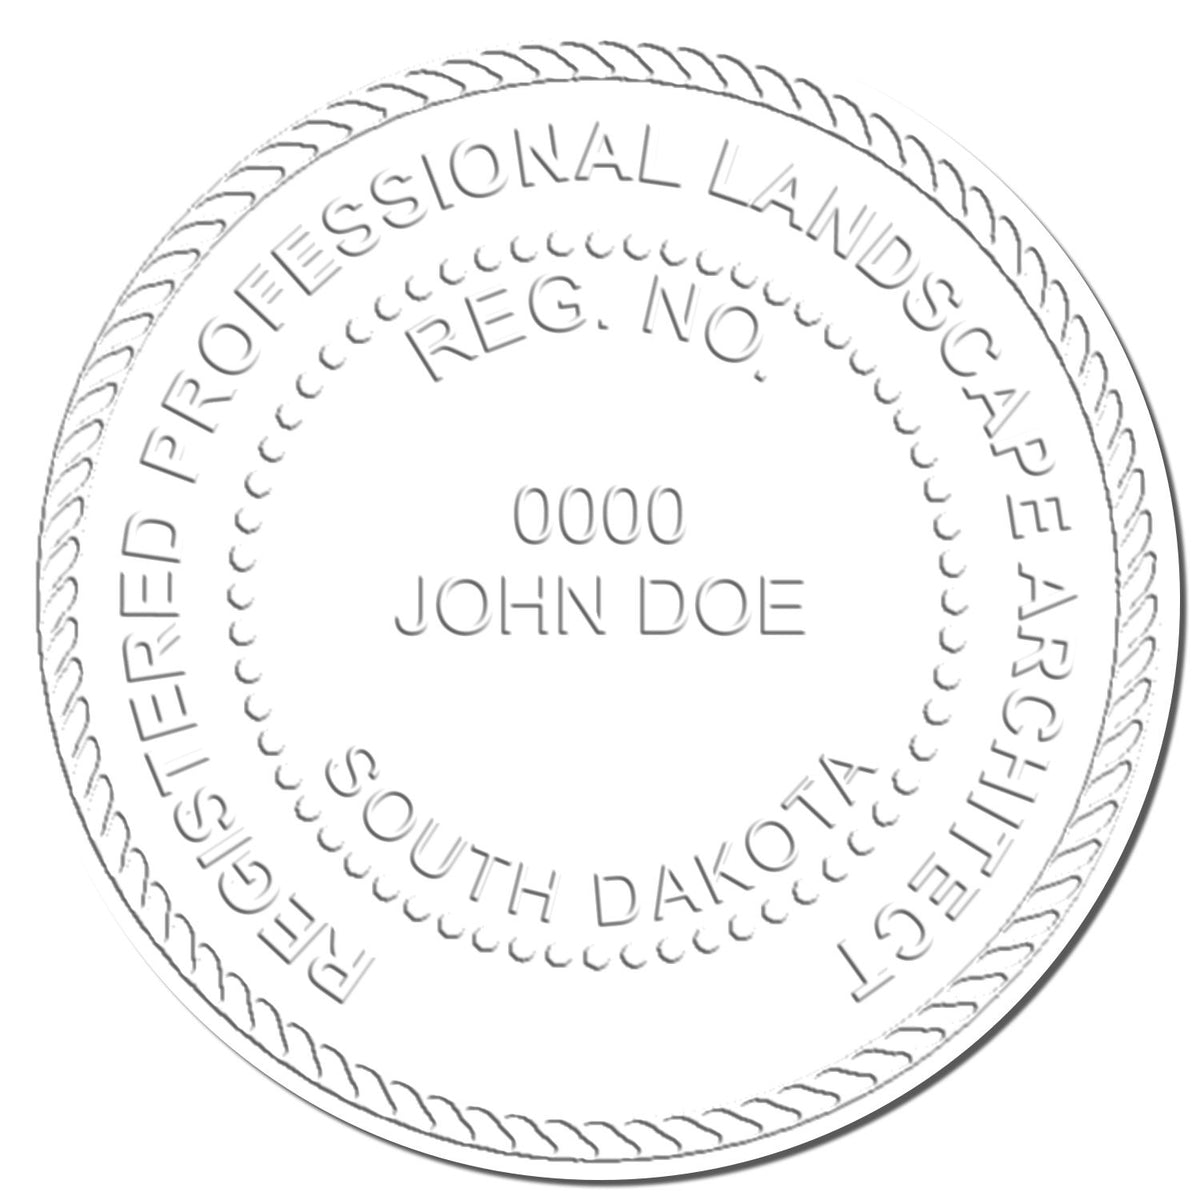 This paper is stamped with a sample imprint of the Hybrid South Dakota Landscape Architect Seal, signifying its quality and reliability.